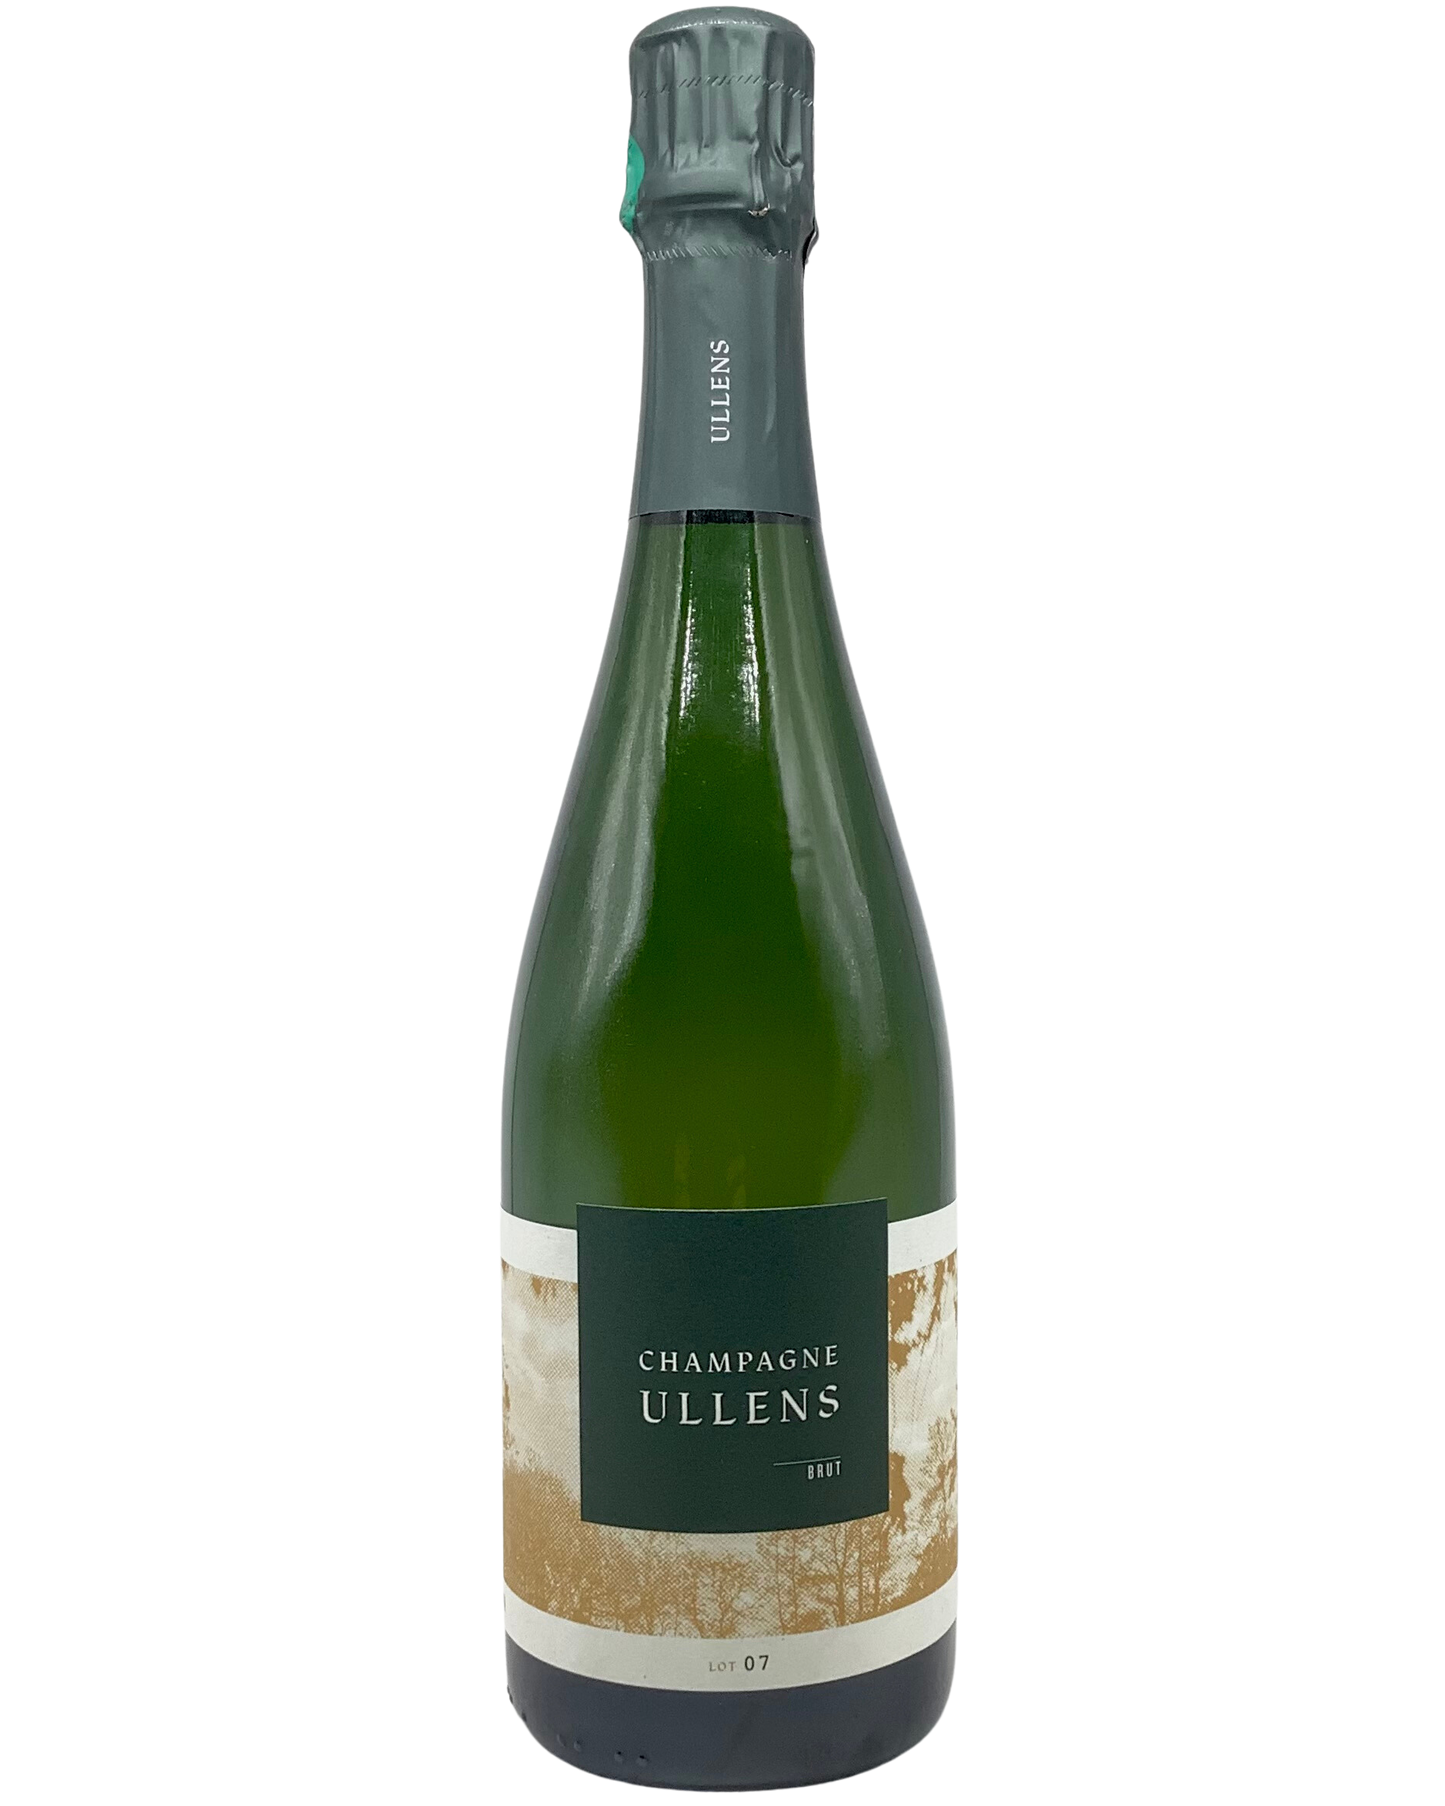 Domaine de Marzilly, Champagne Brut "Ullens" Lot No. 7, France NV newarrival organic